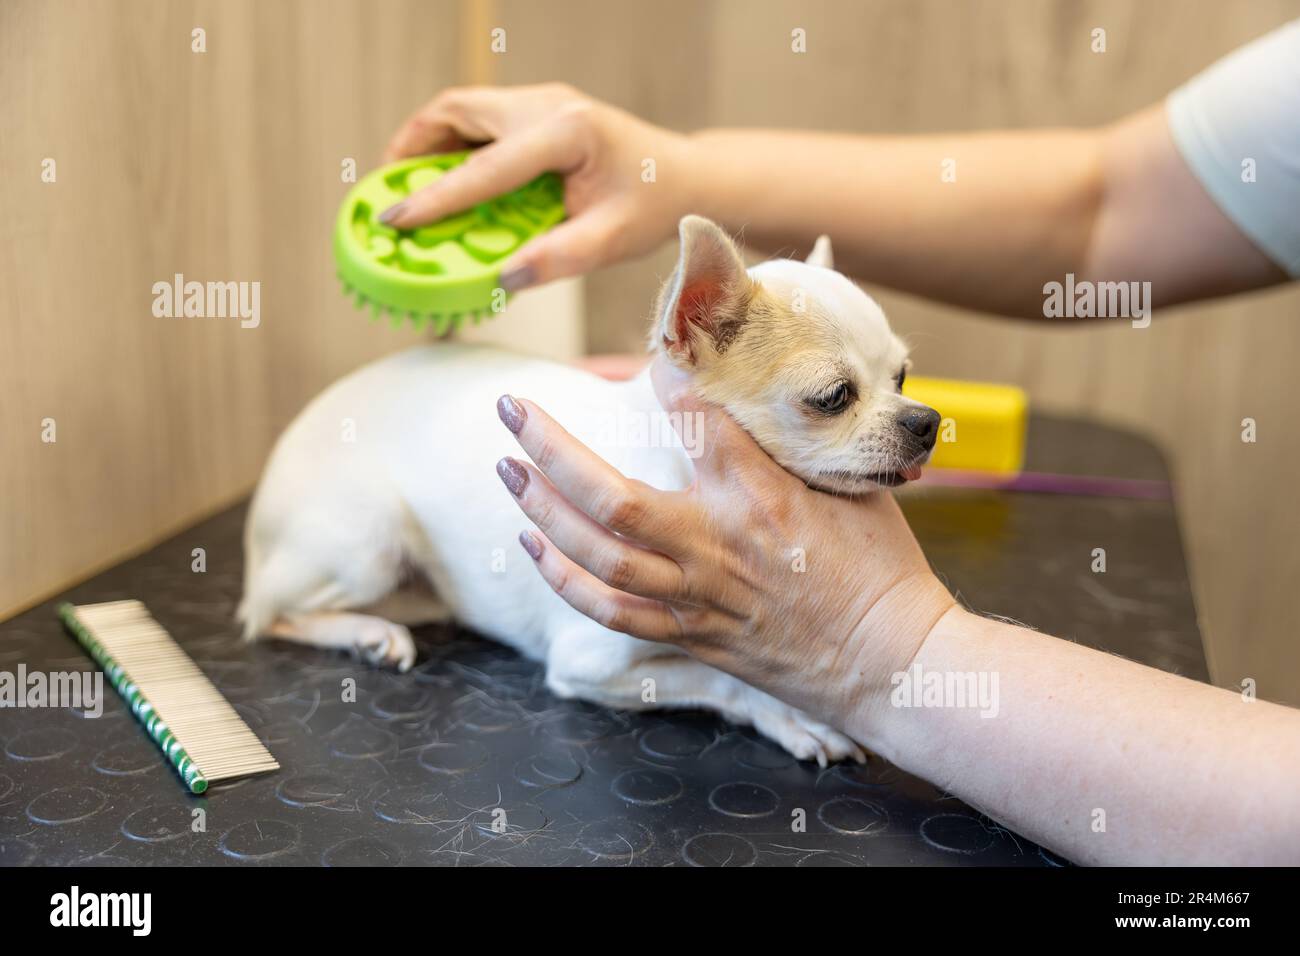 white chi hua hua is combing by groomer in the grooming salon. animal care concept Stock Photo